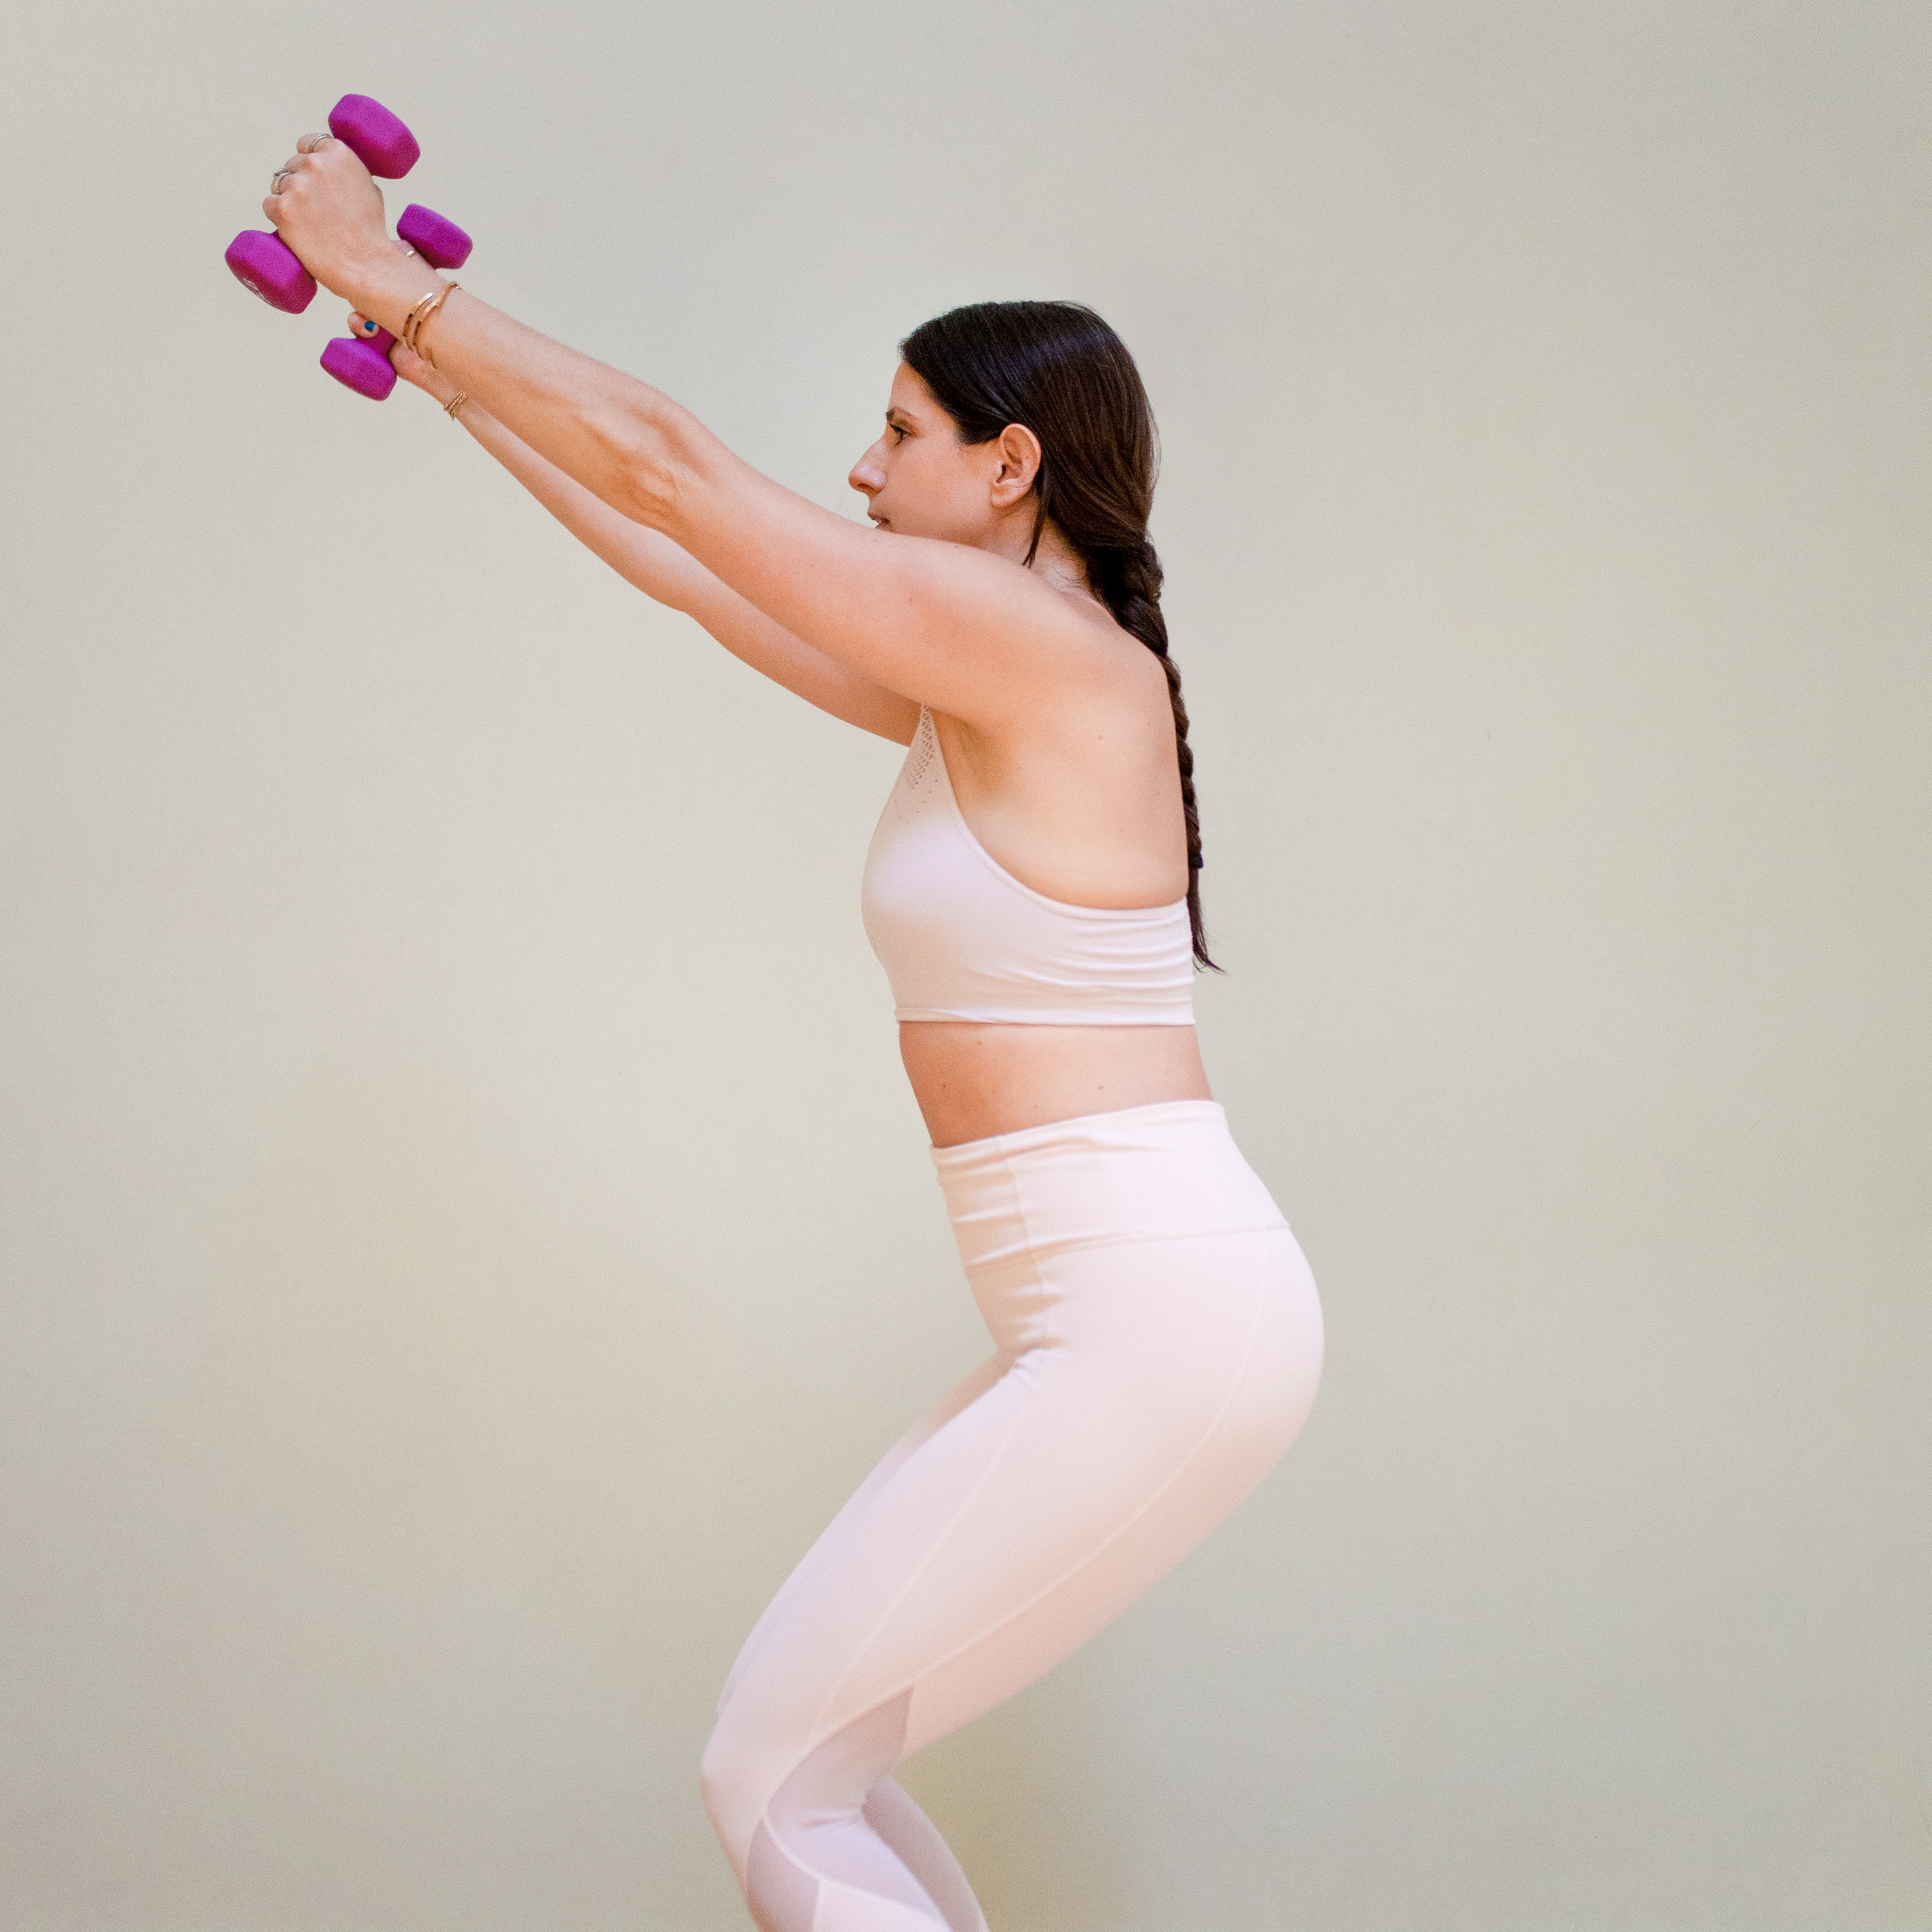 hatha yoga with weights sequence